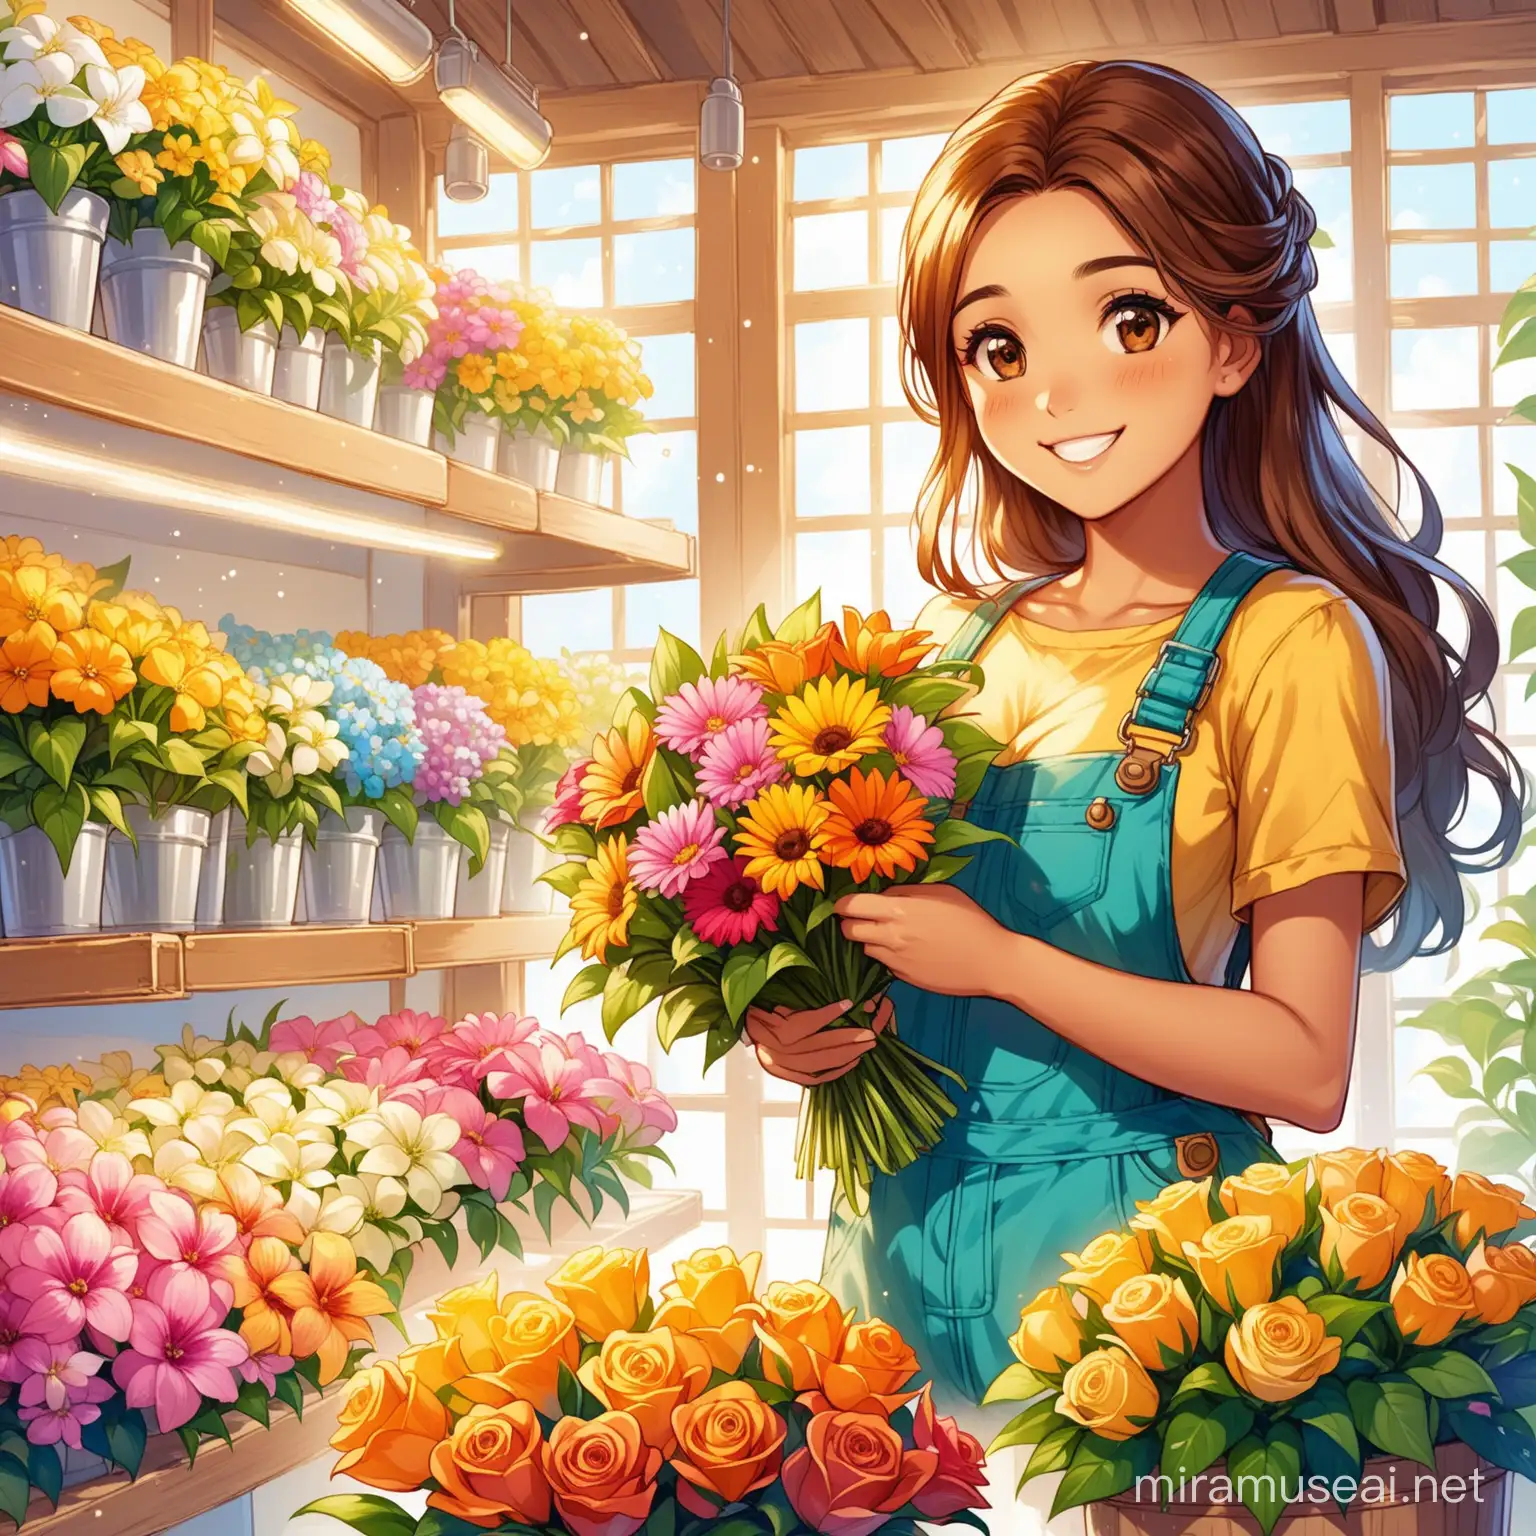 In the computerized flower shop, Isabela, young adult, fair skin, brown hair, brown eyes, was dressed in her overalls, happy, creating beautiful bouquets of flowers, happy customers, an illustration from a storybook